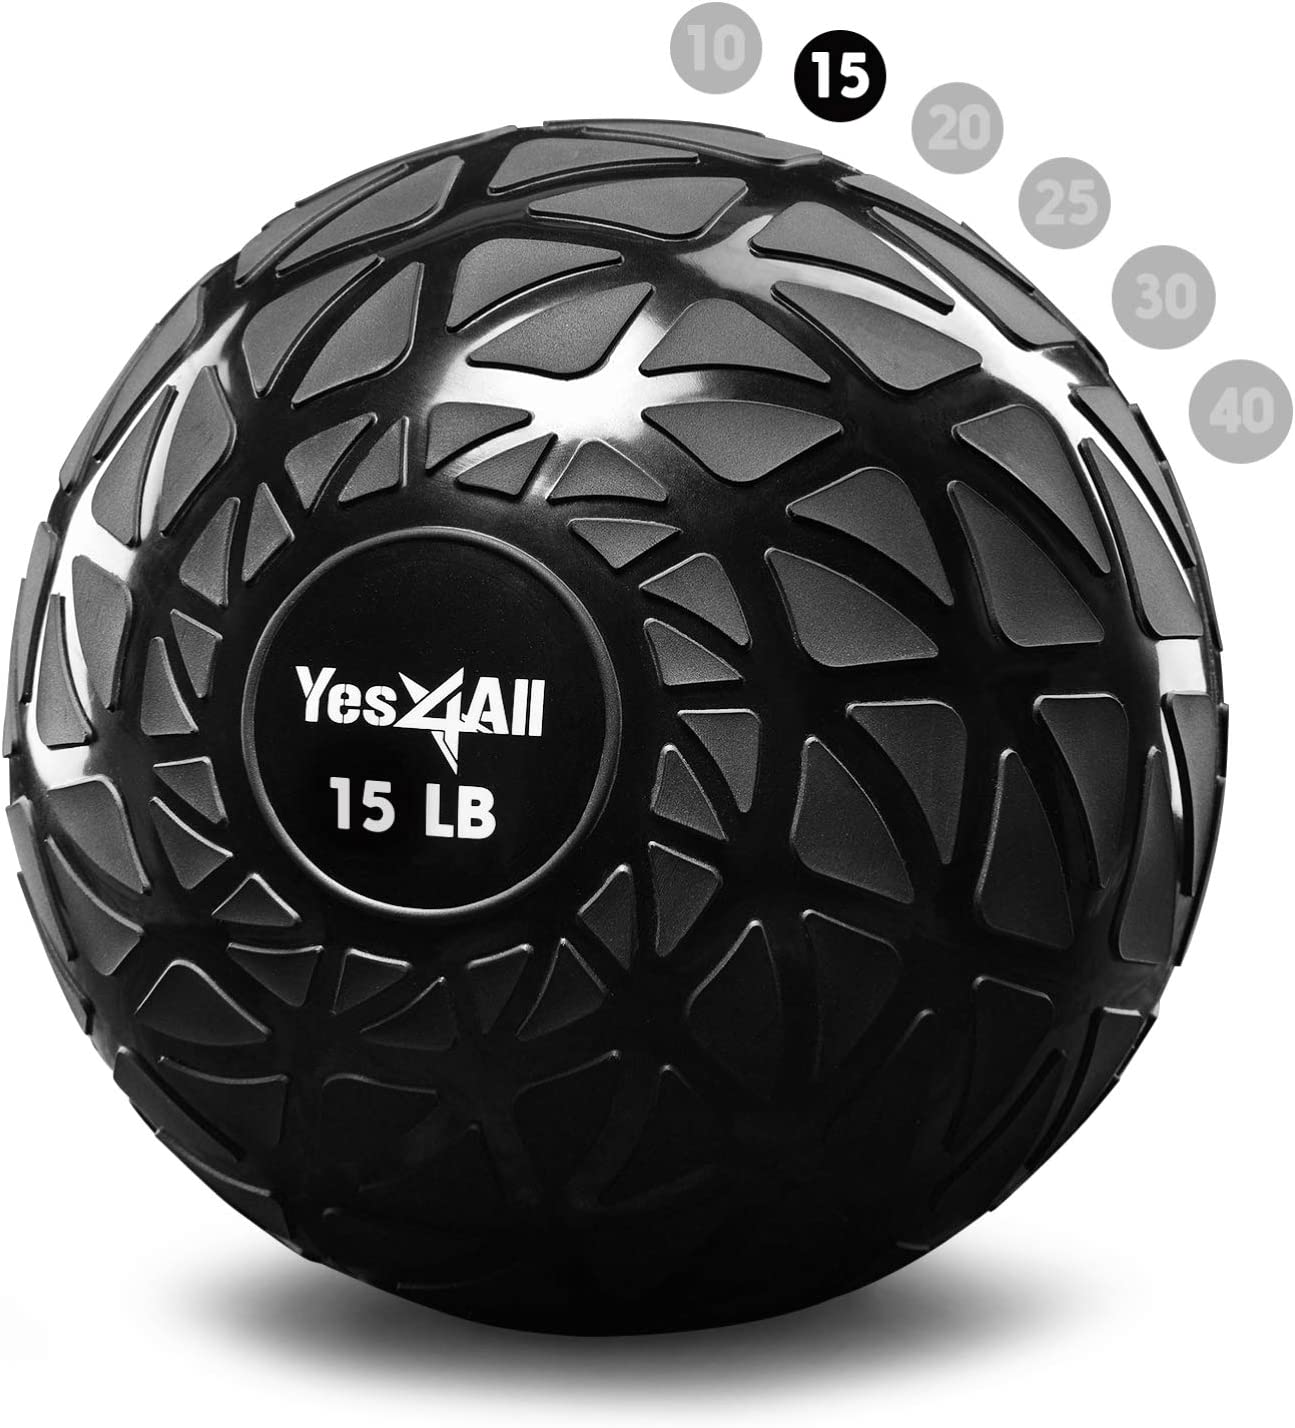 Yes4All 15lbs Dynamic Slam Ball Black - image 1 of 7